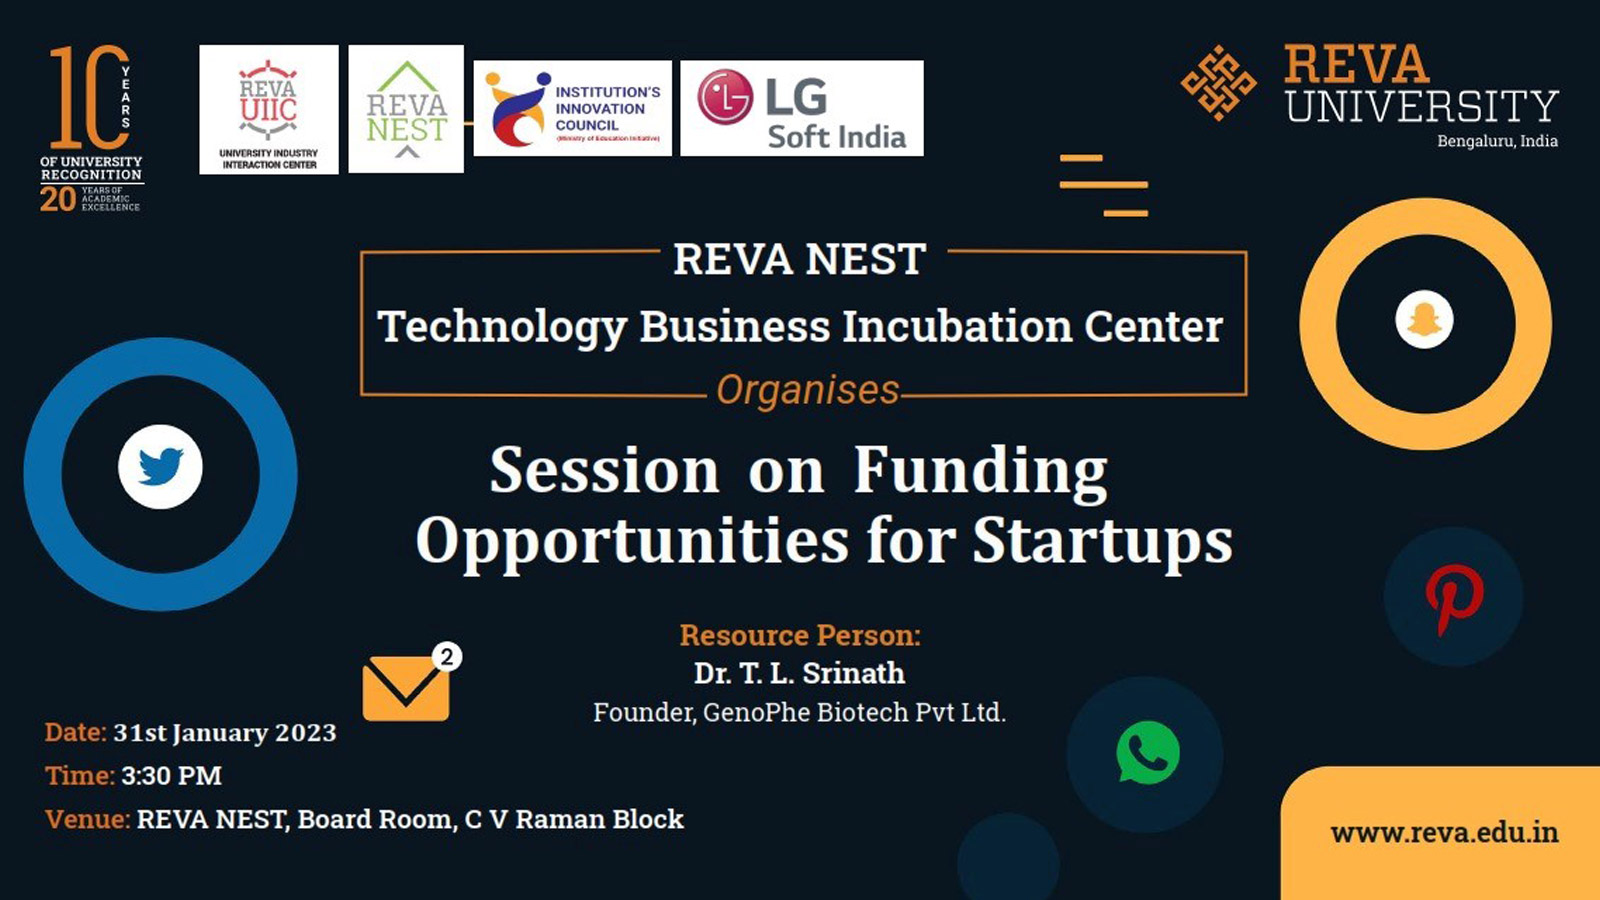 Session on Funding Opportunities for Startups